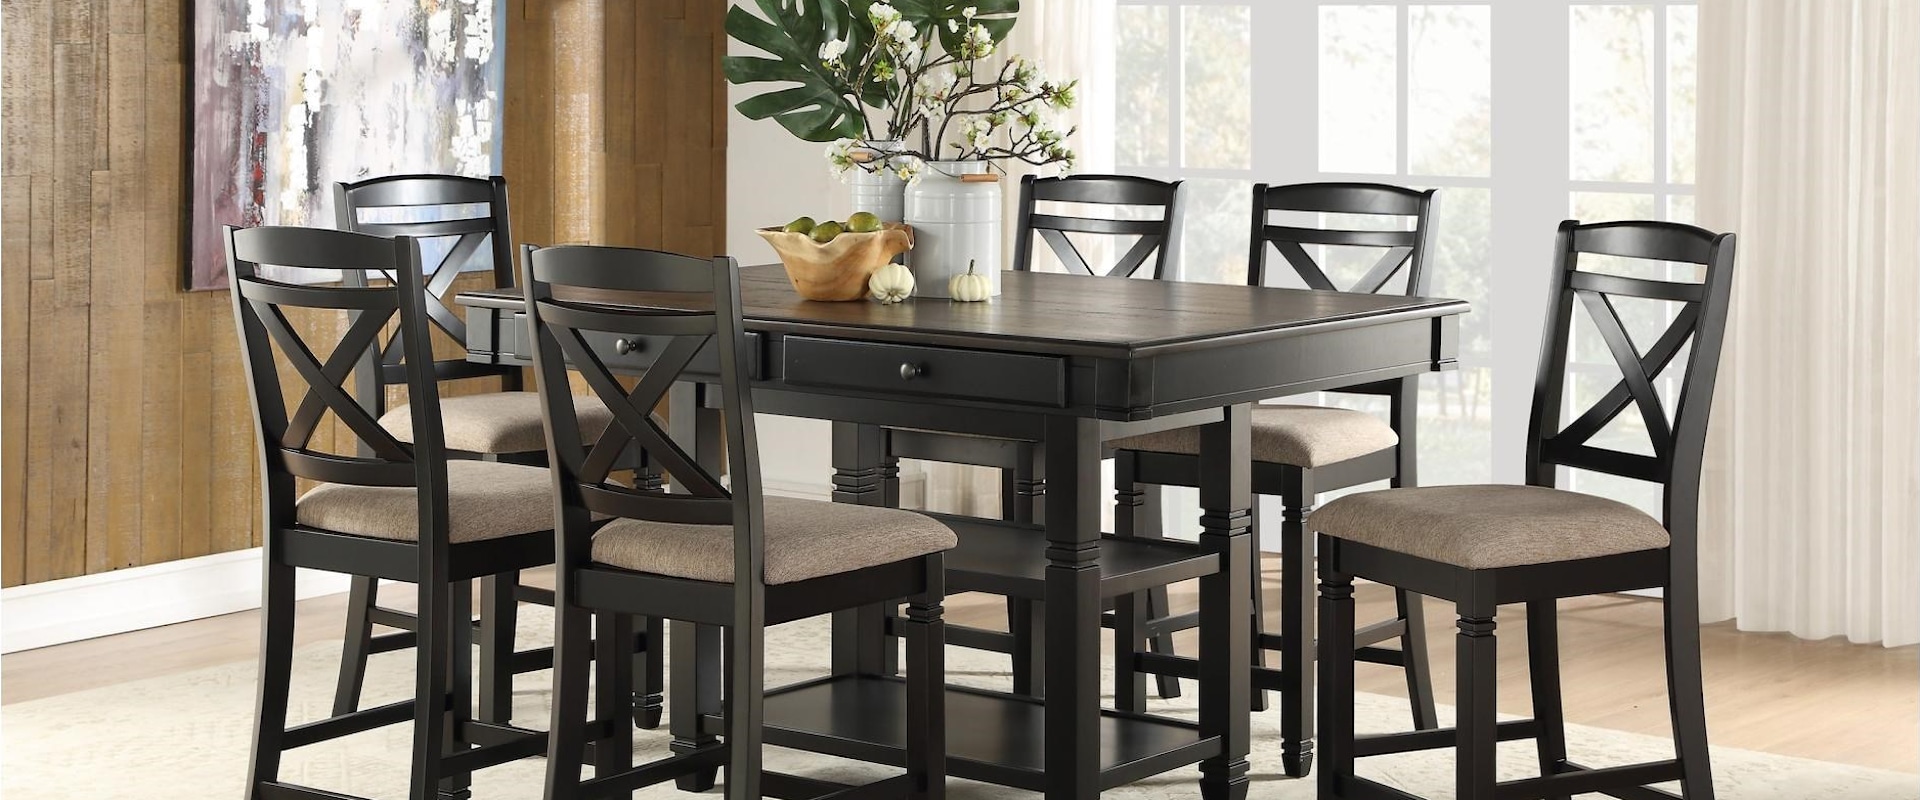 Two-Toned 7-Piece Dining Set